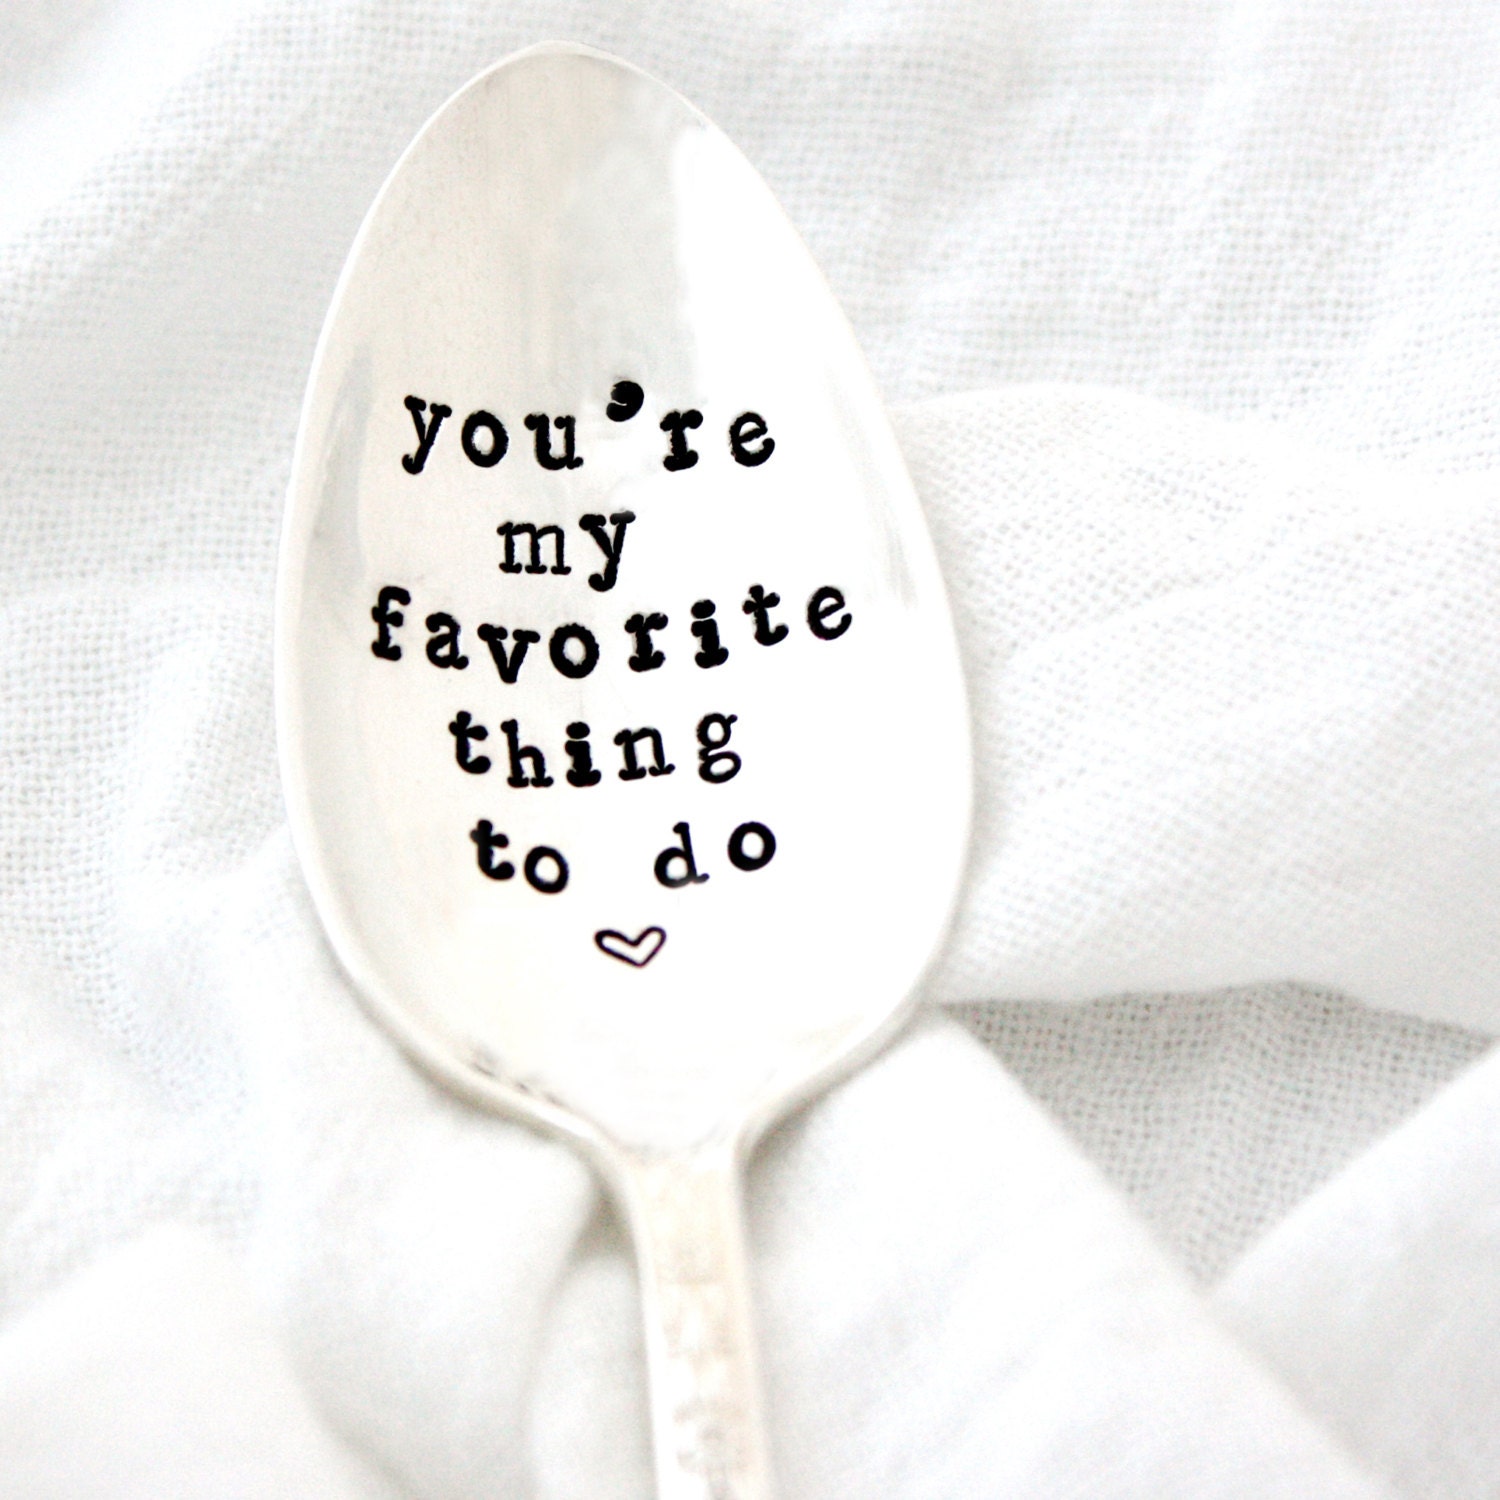 You're My Favorite Thing To Do. Hand stamped coffee spoon for a cheeky valentines day gift.